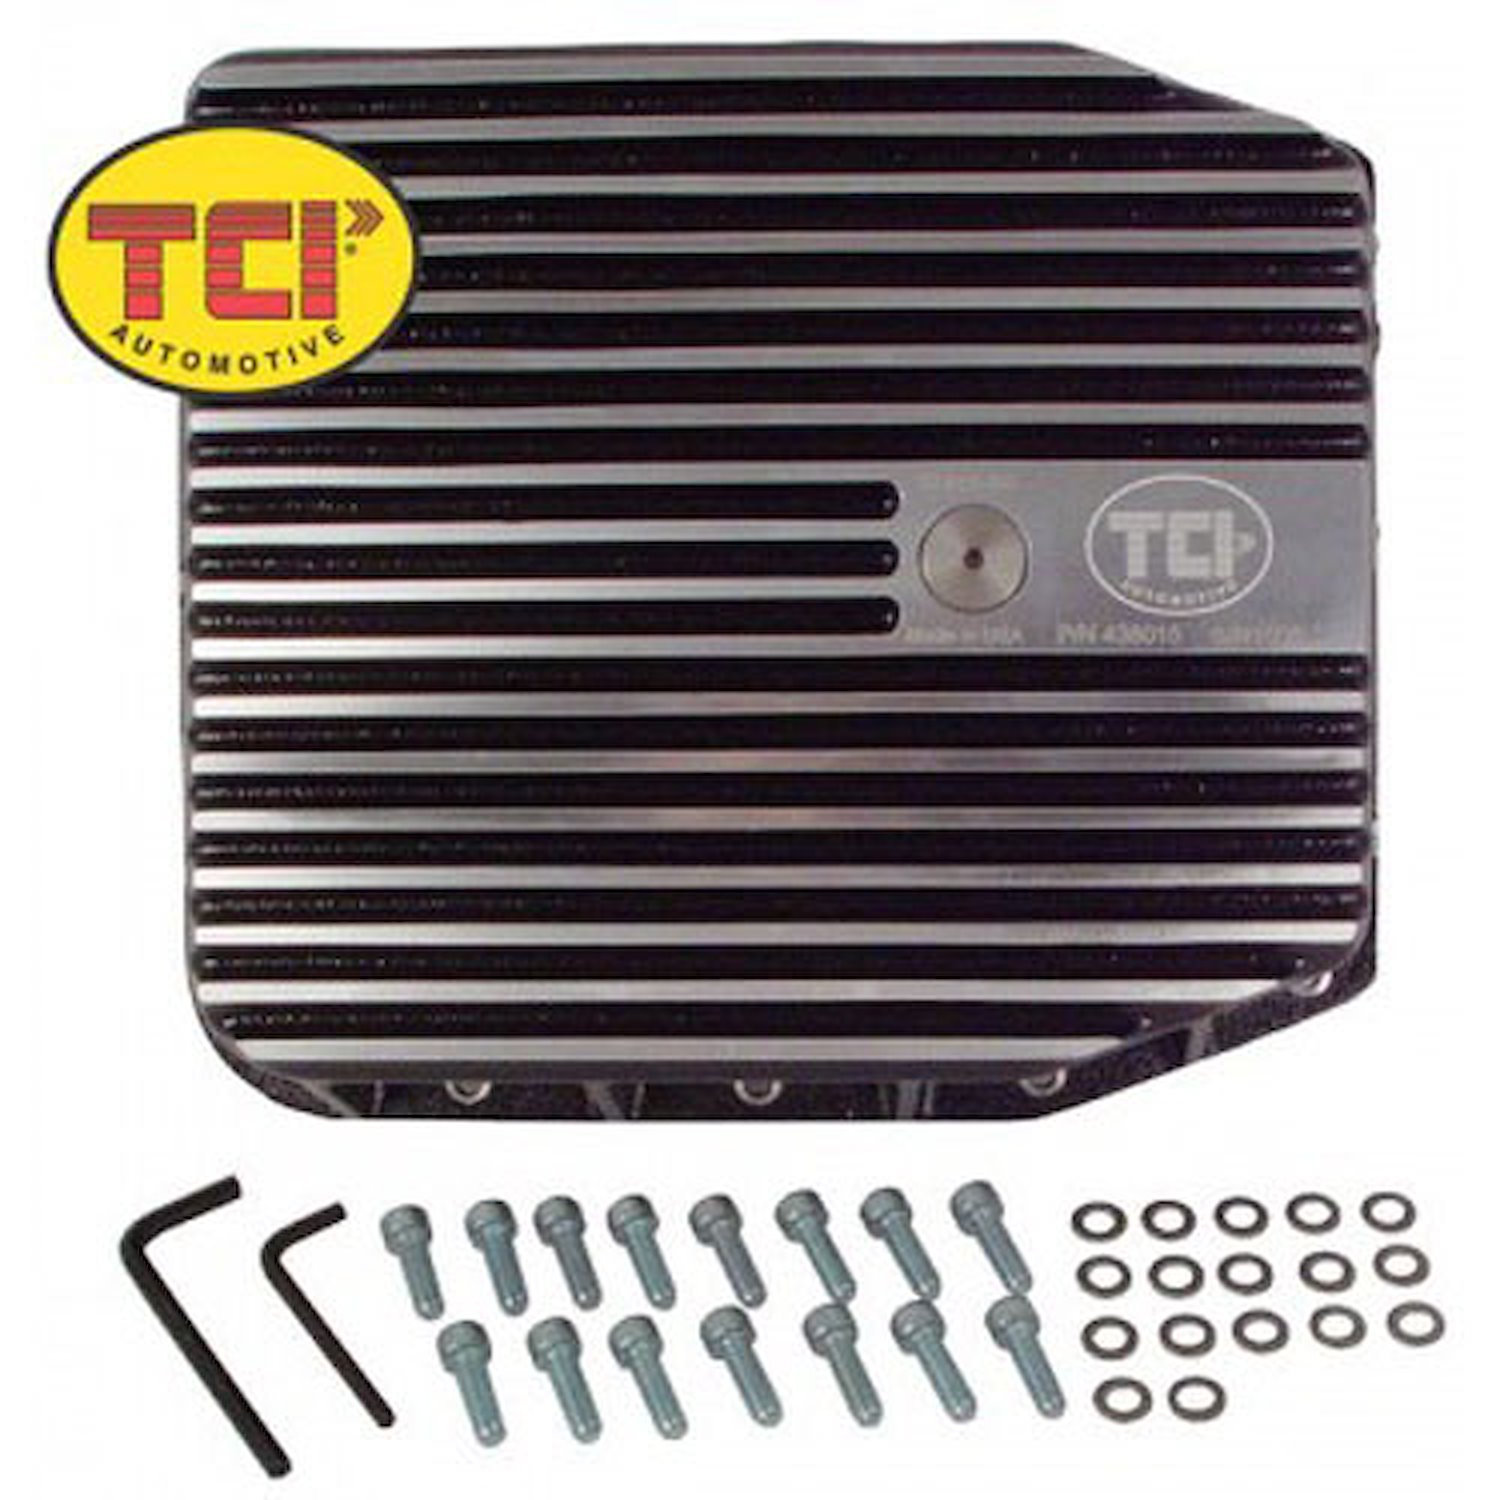 Max-Cool Aluminum Deep Transmission Pan Ford AODE/4R70W